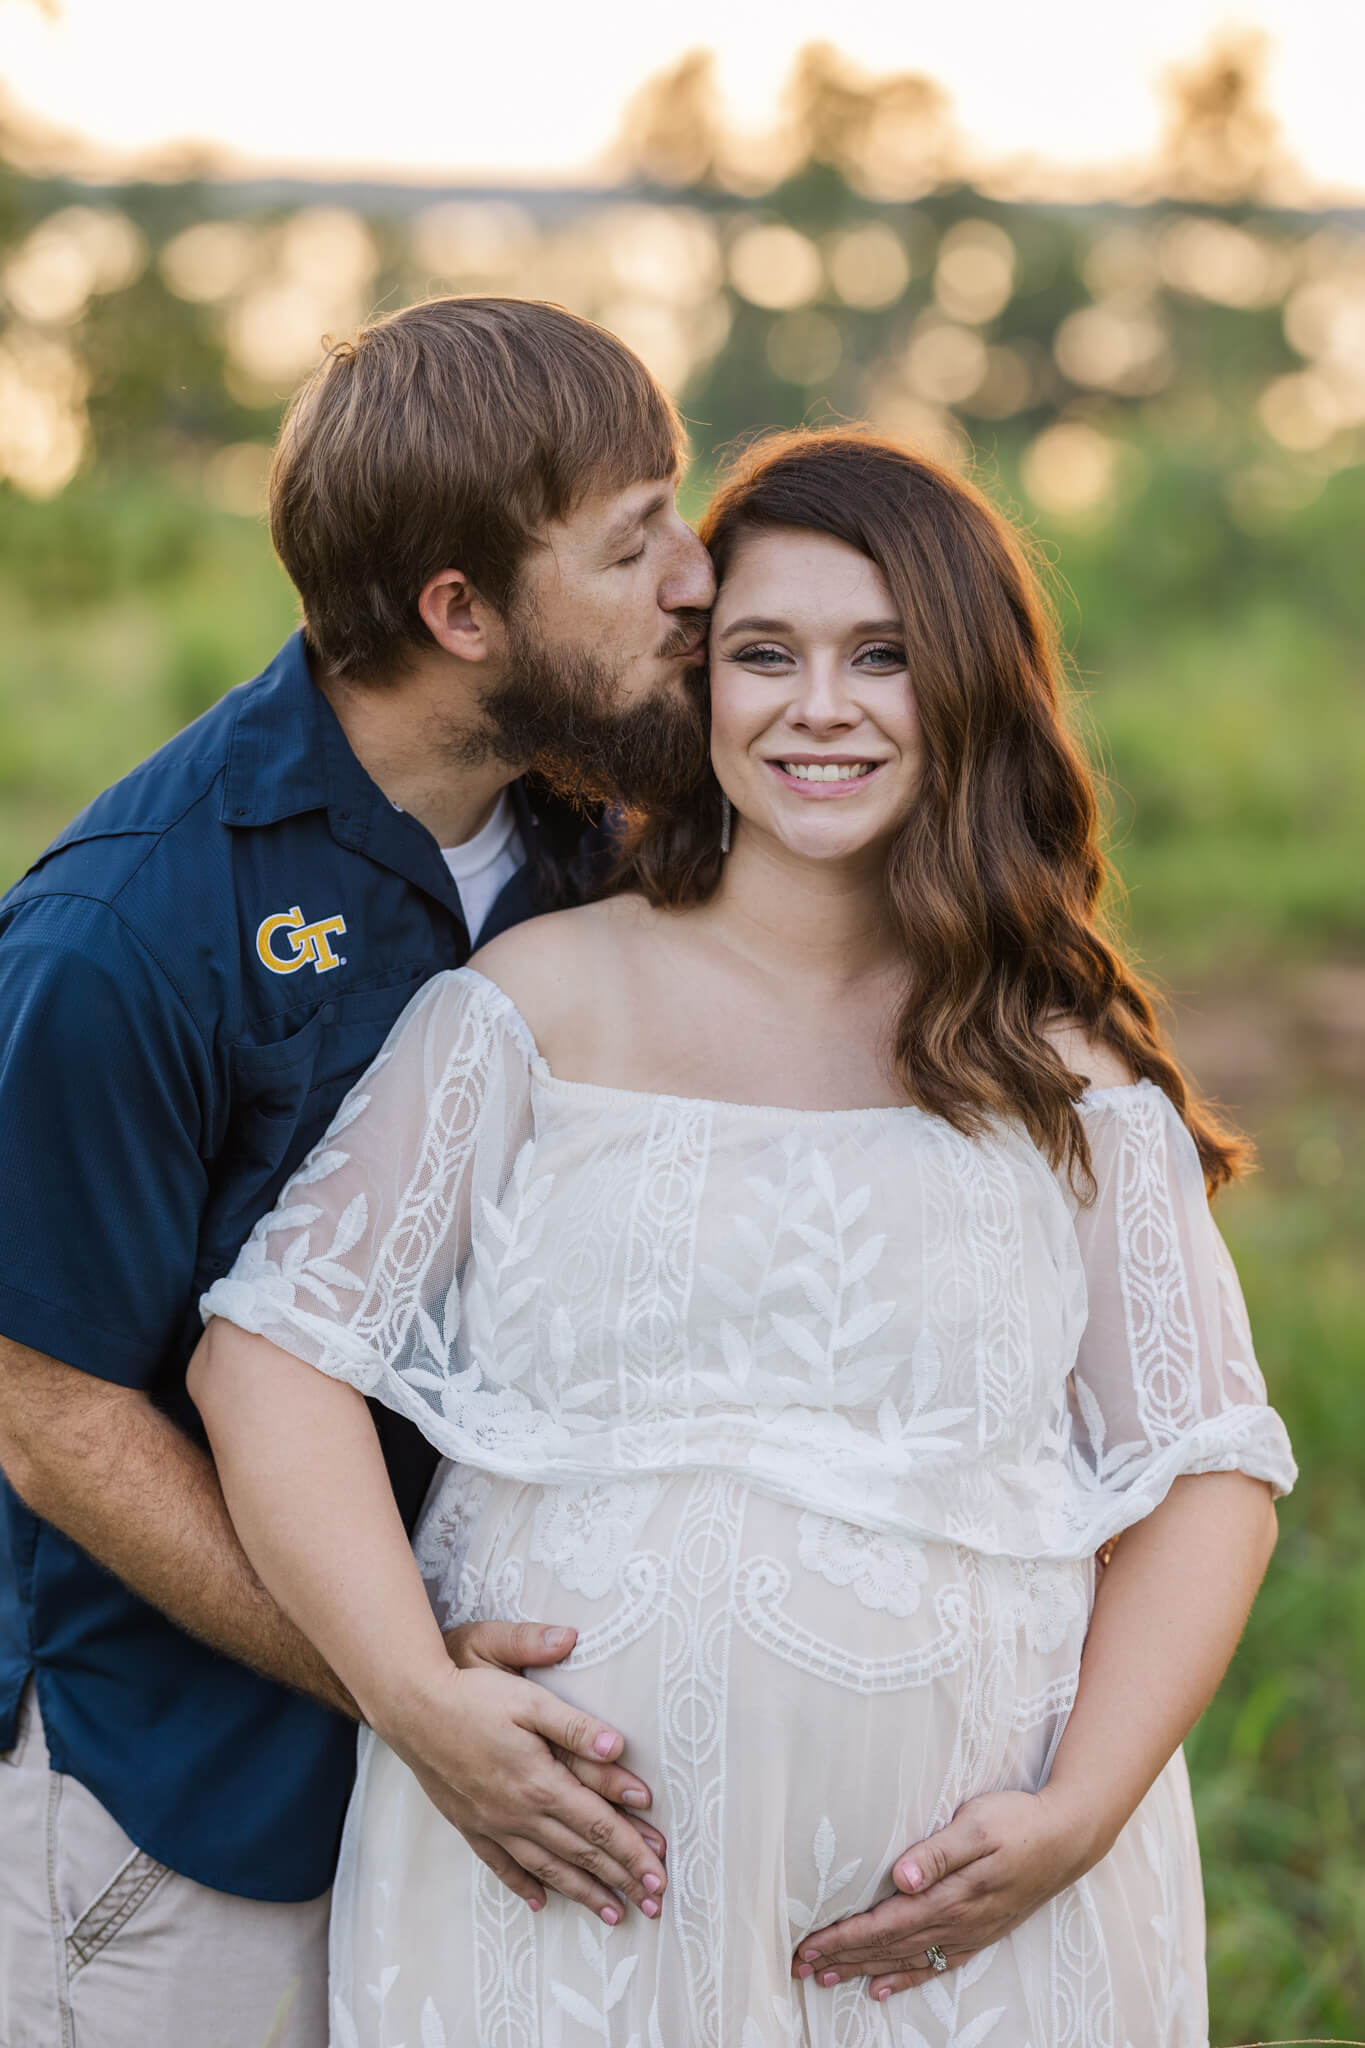 Dad is kissing mom on the temple during their maternity session in an open field at golden hour. birthing center augusta ga